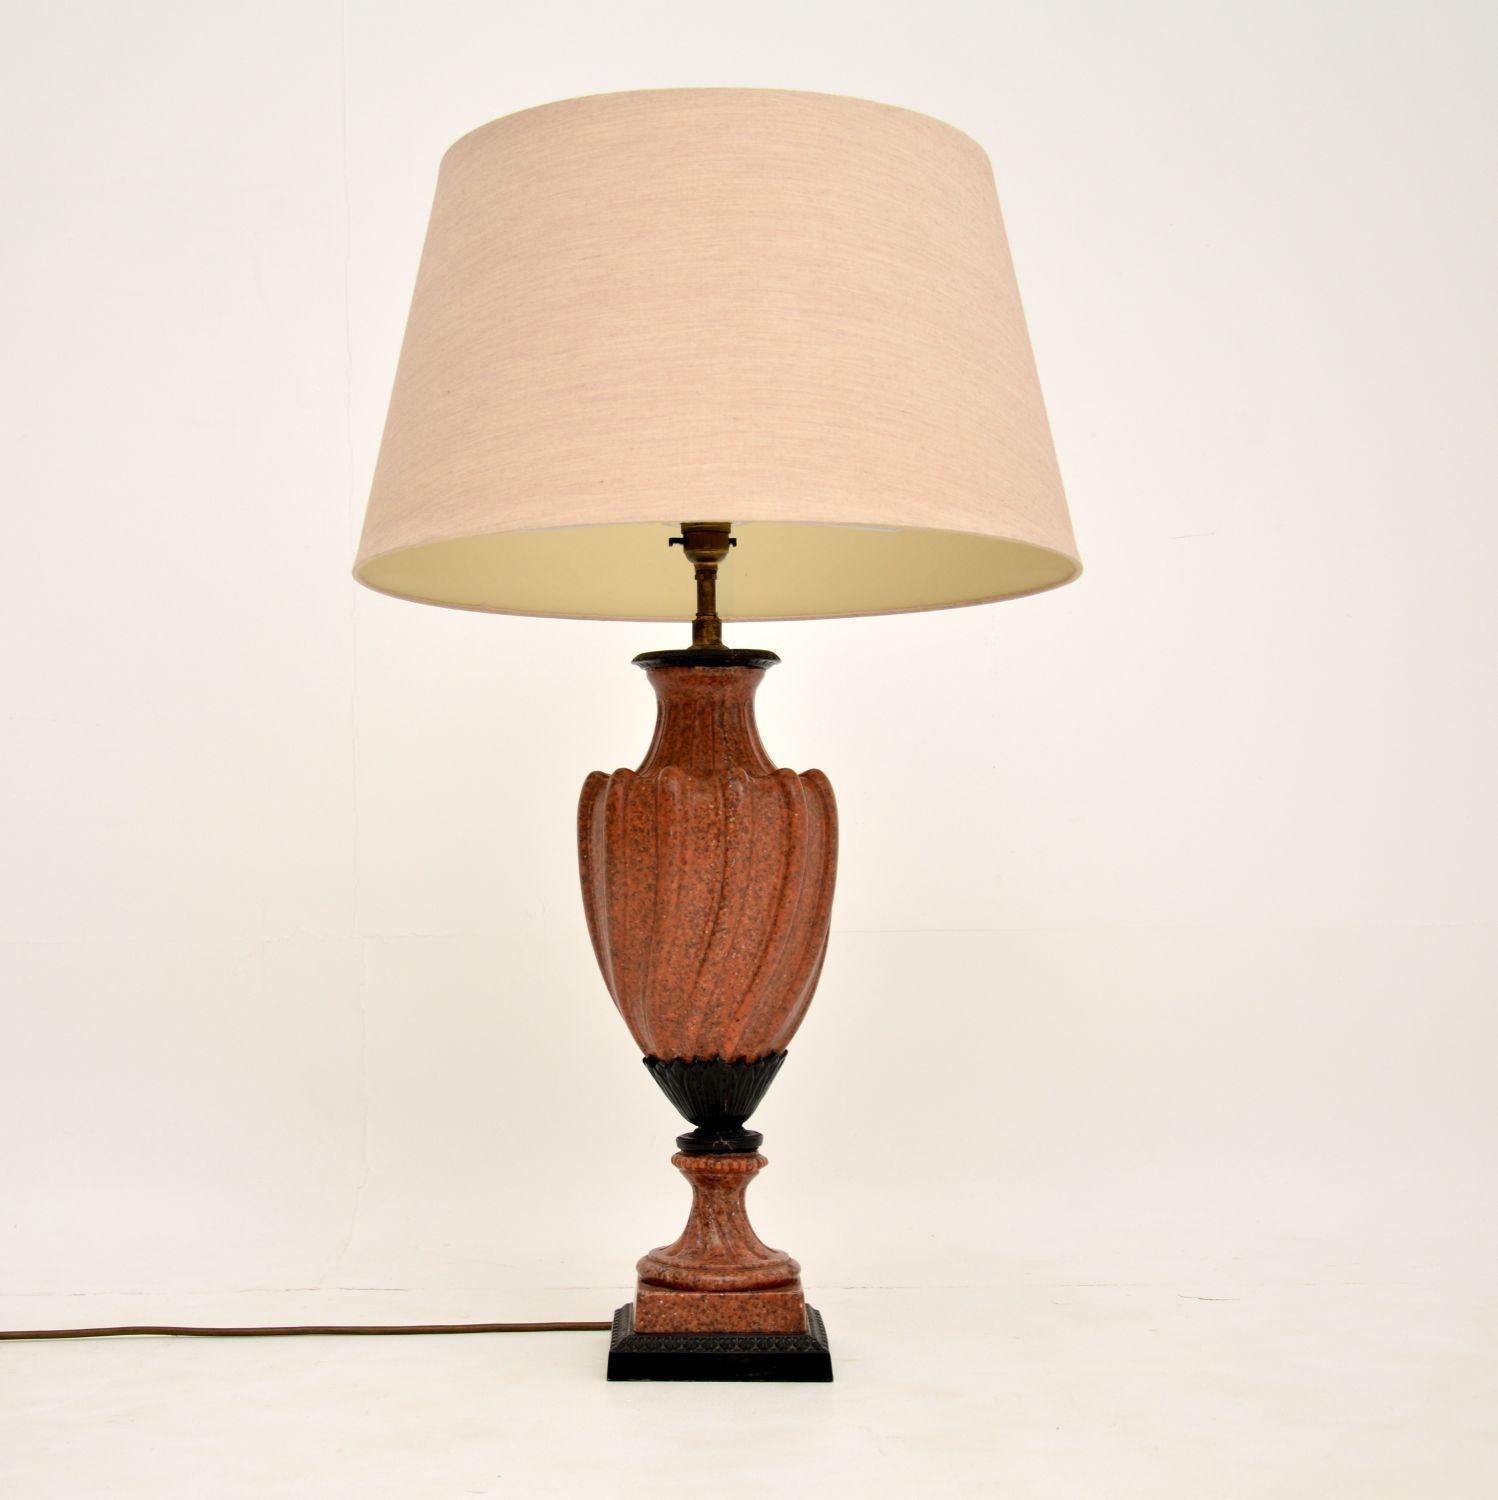 A stunning antique table lamp in solid marble. This is most likely French, dating from around the 1910 period.

The quality is amazing, the marble has been sculptured with great skill. This has gorgeous colour tones and is in great condition for